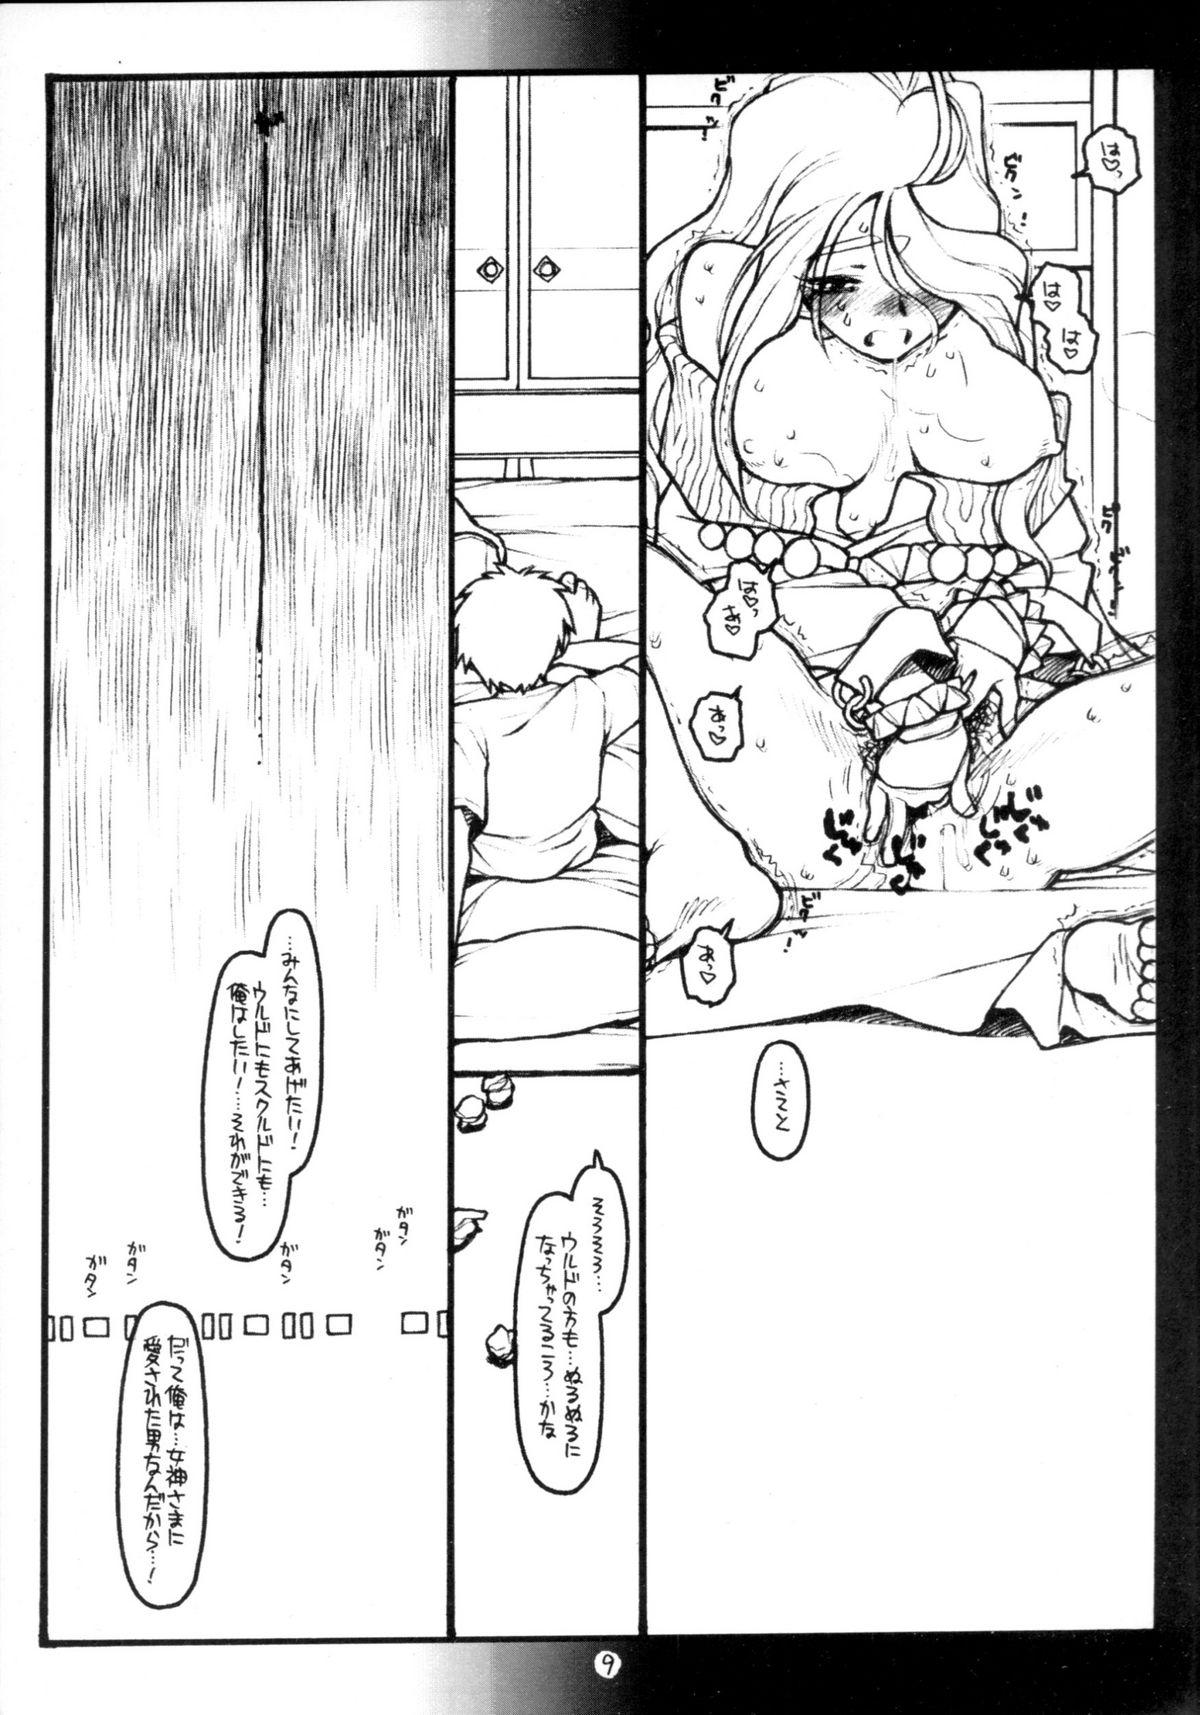 Candid O,My Sadness Episode #5 - Ah my goddess Shecock - Page 9